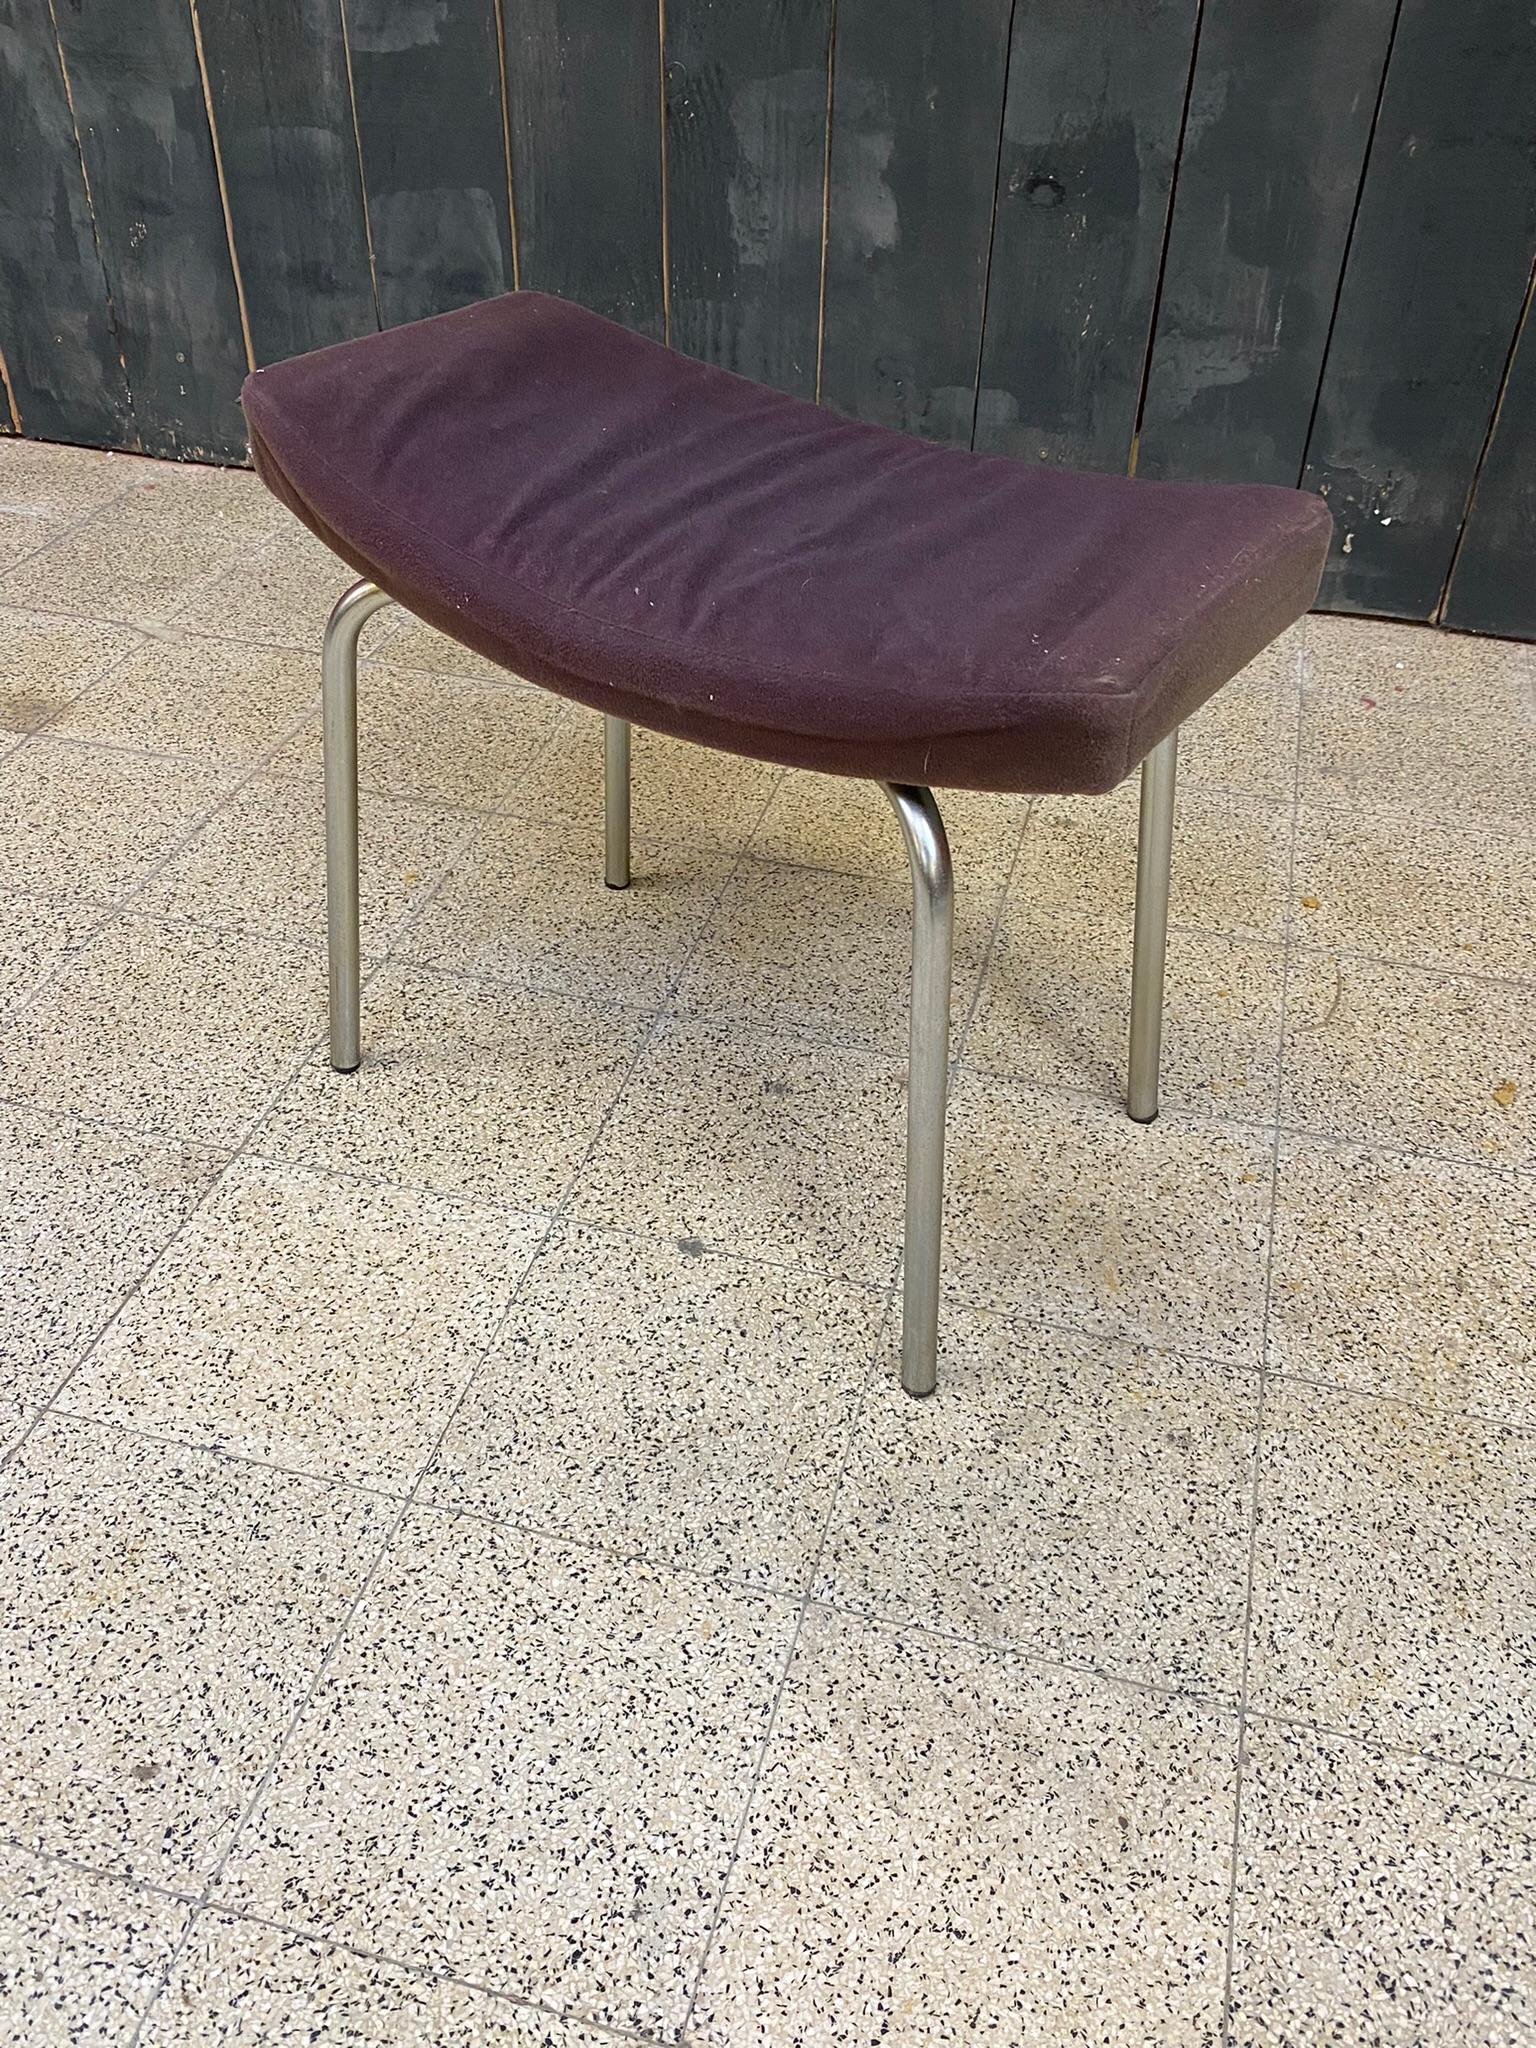 Mid-20th Century Stool French Design of the 1950s by Pierre Guariche for Meurop For Sale